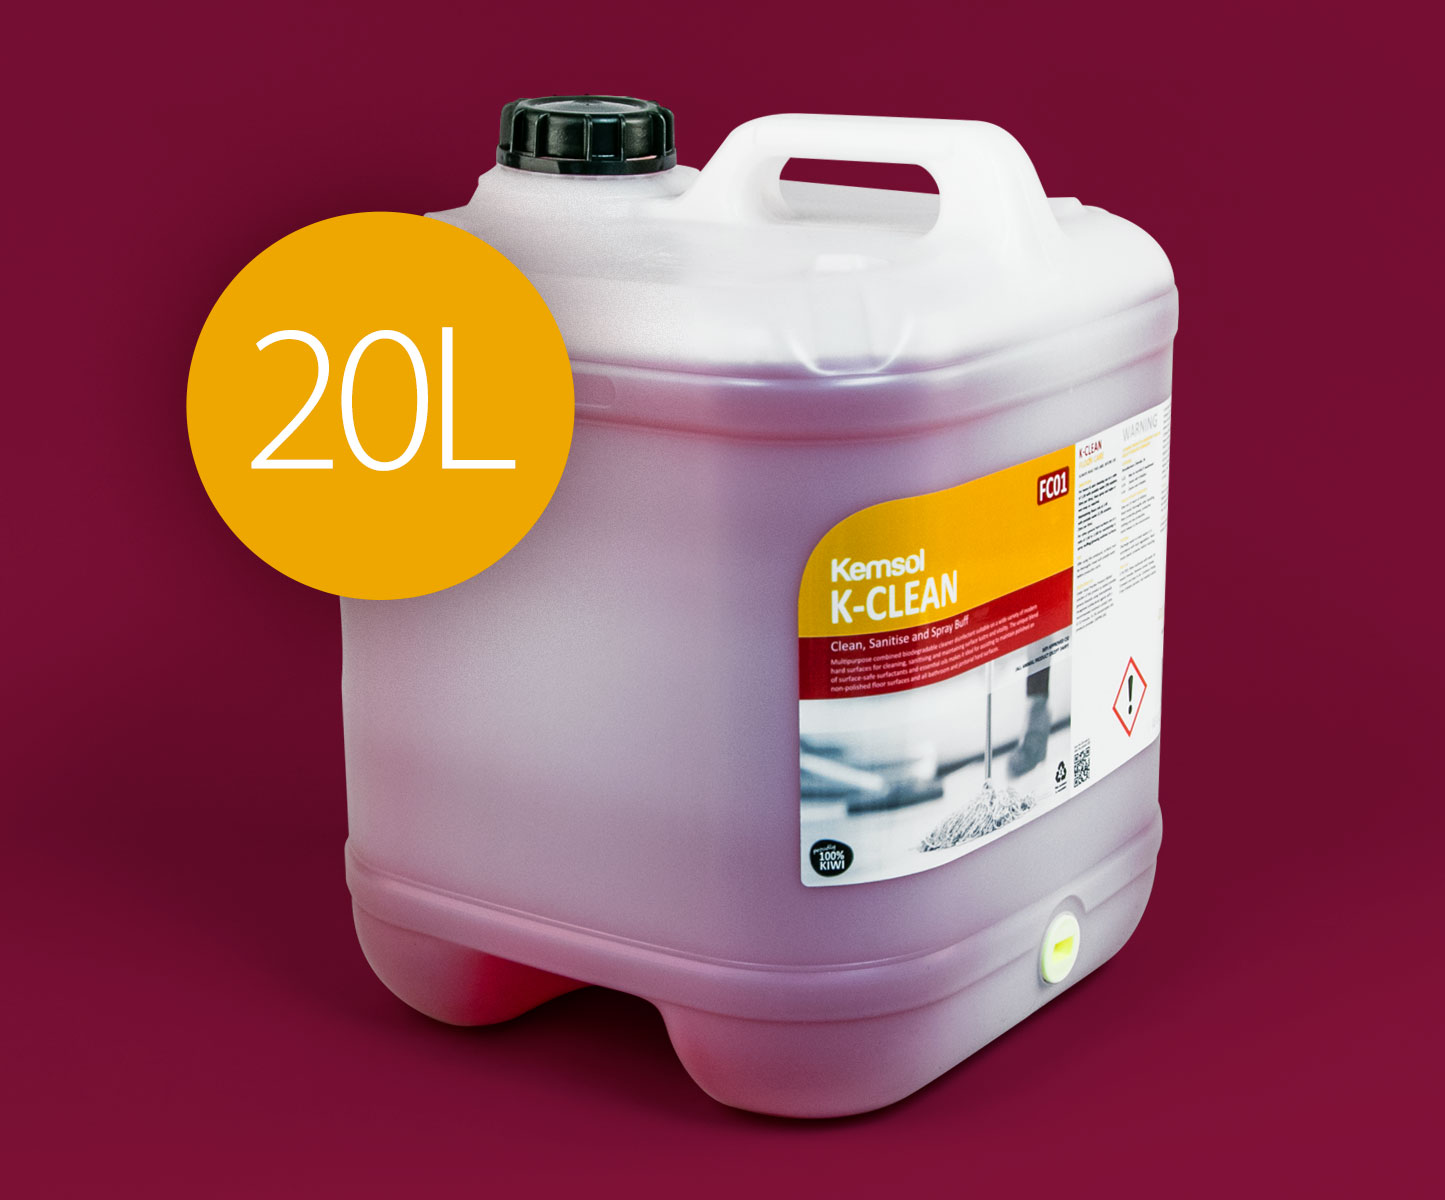 20l-jerry-can-1445